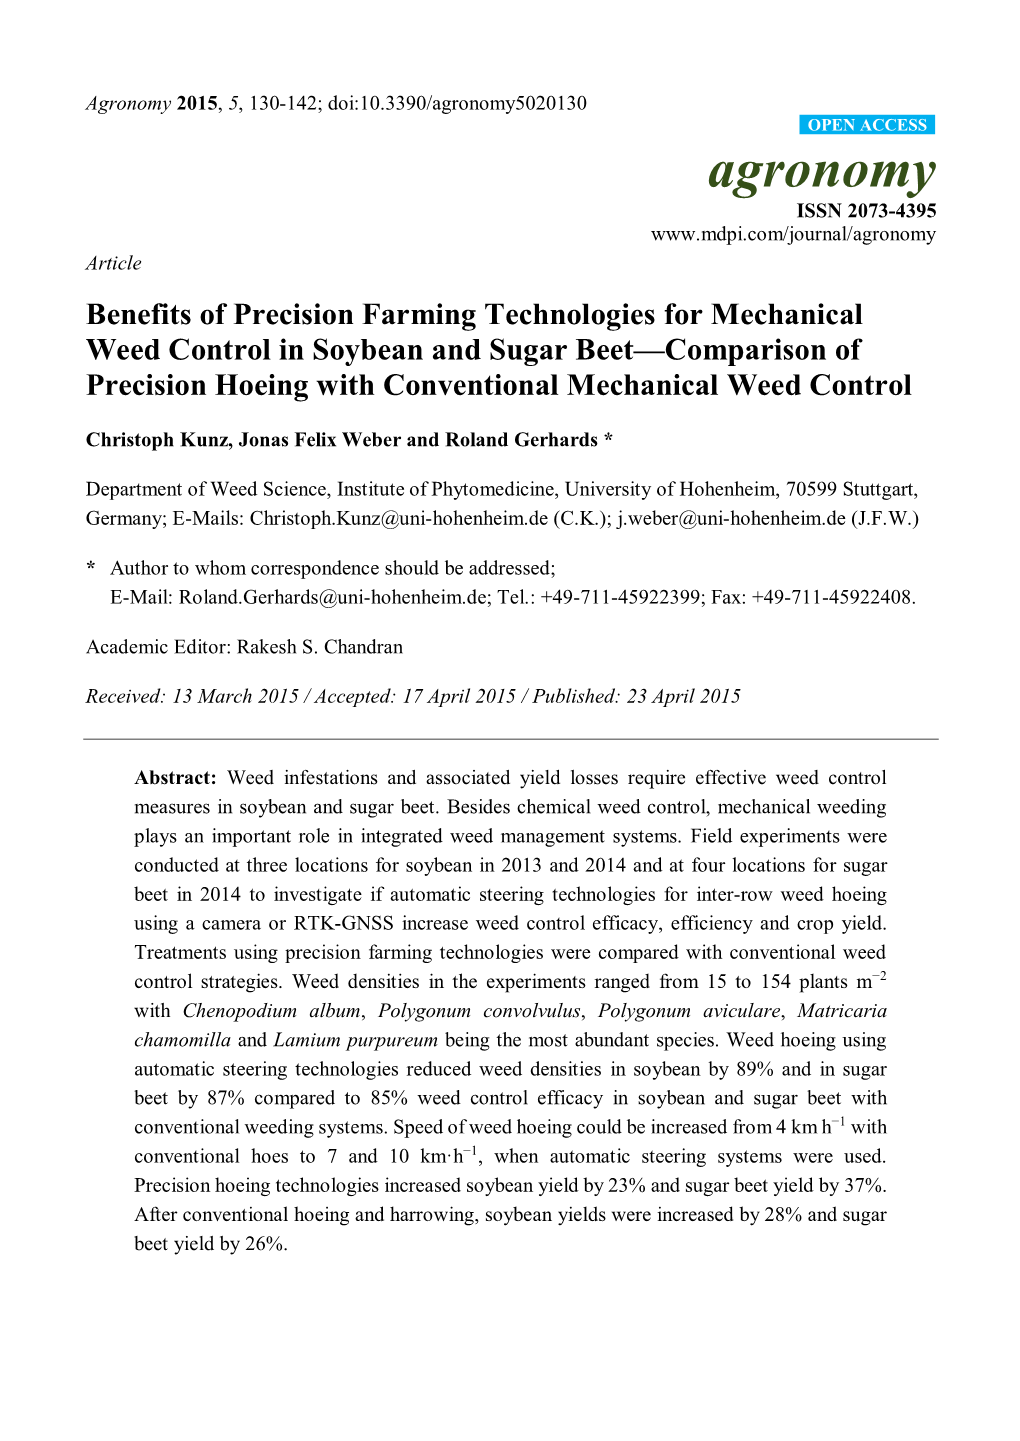 Benefits of Precision Farming Technologies for Mechanical Weed